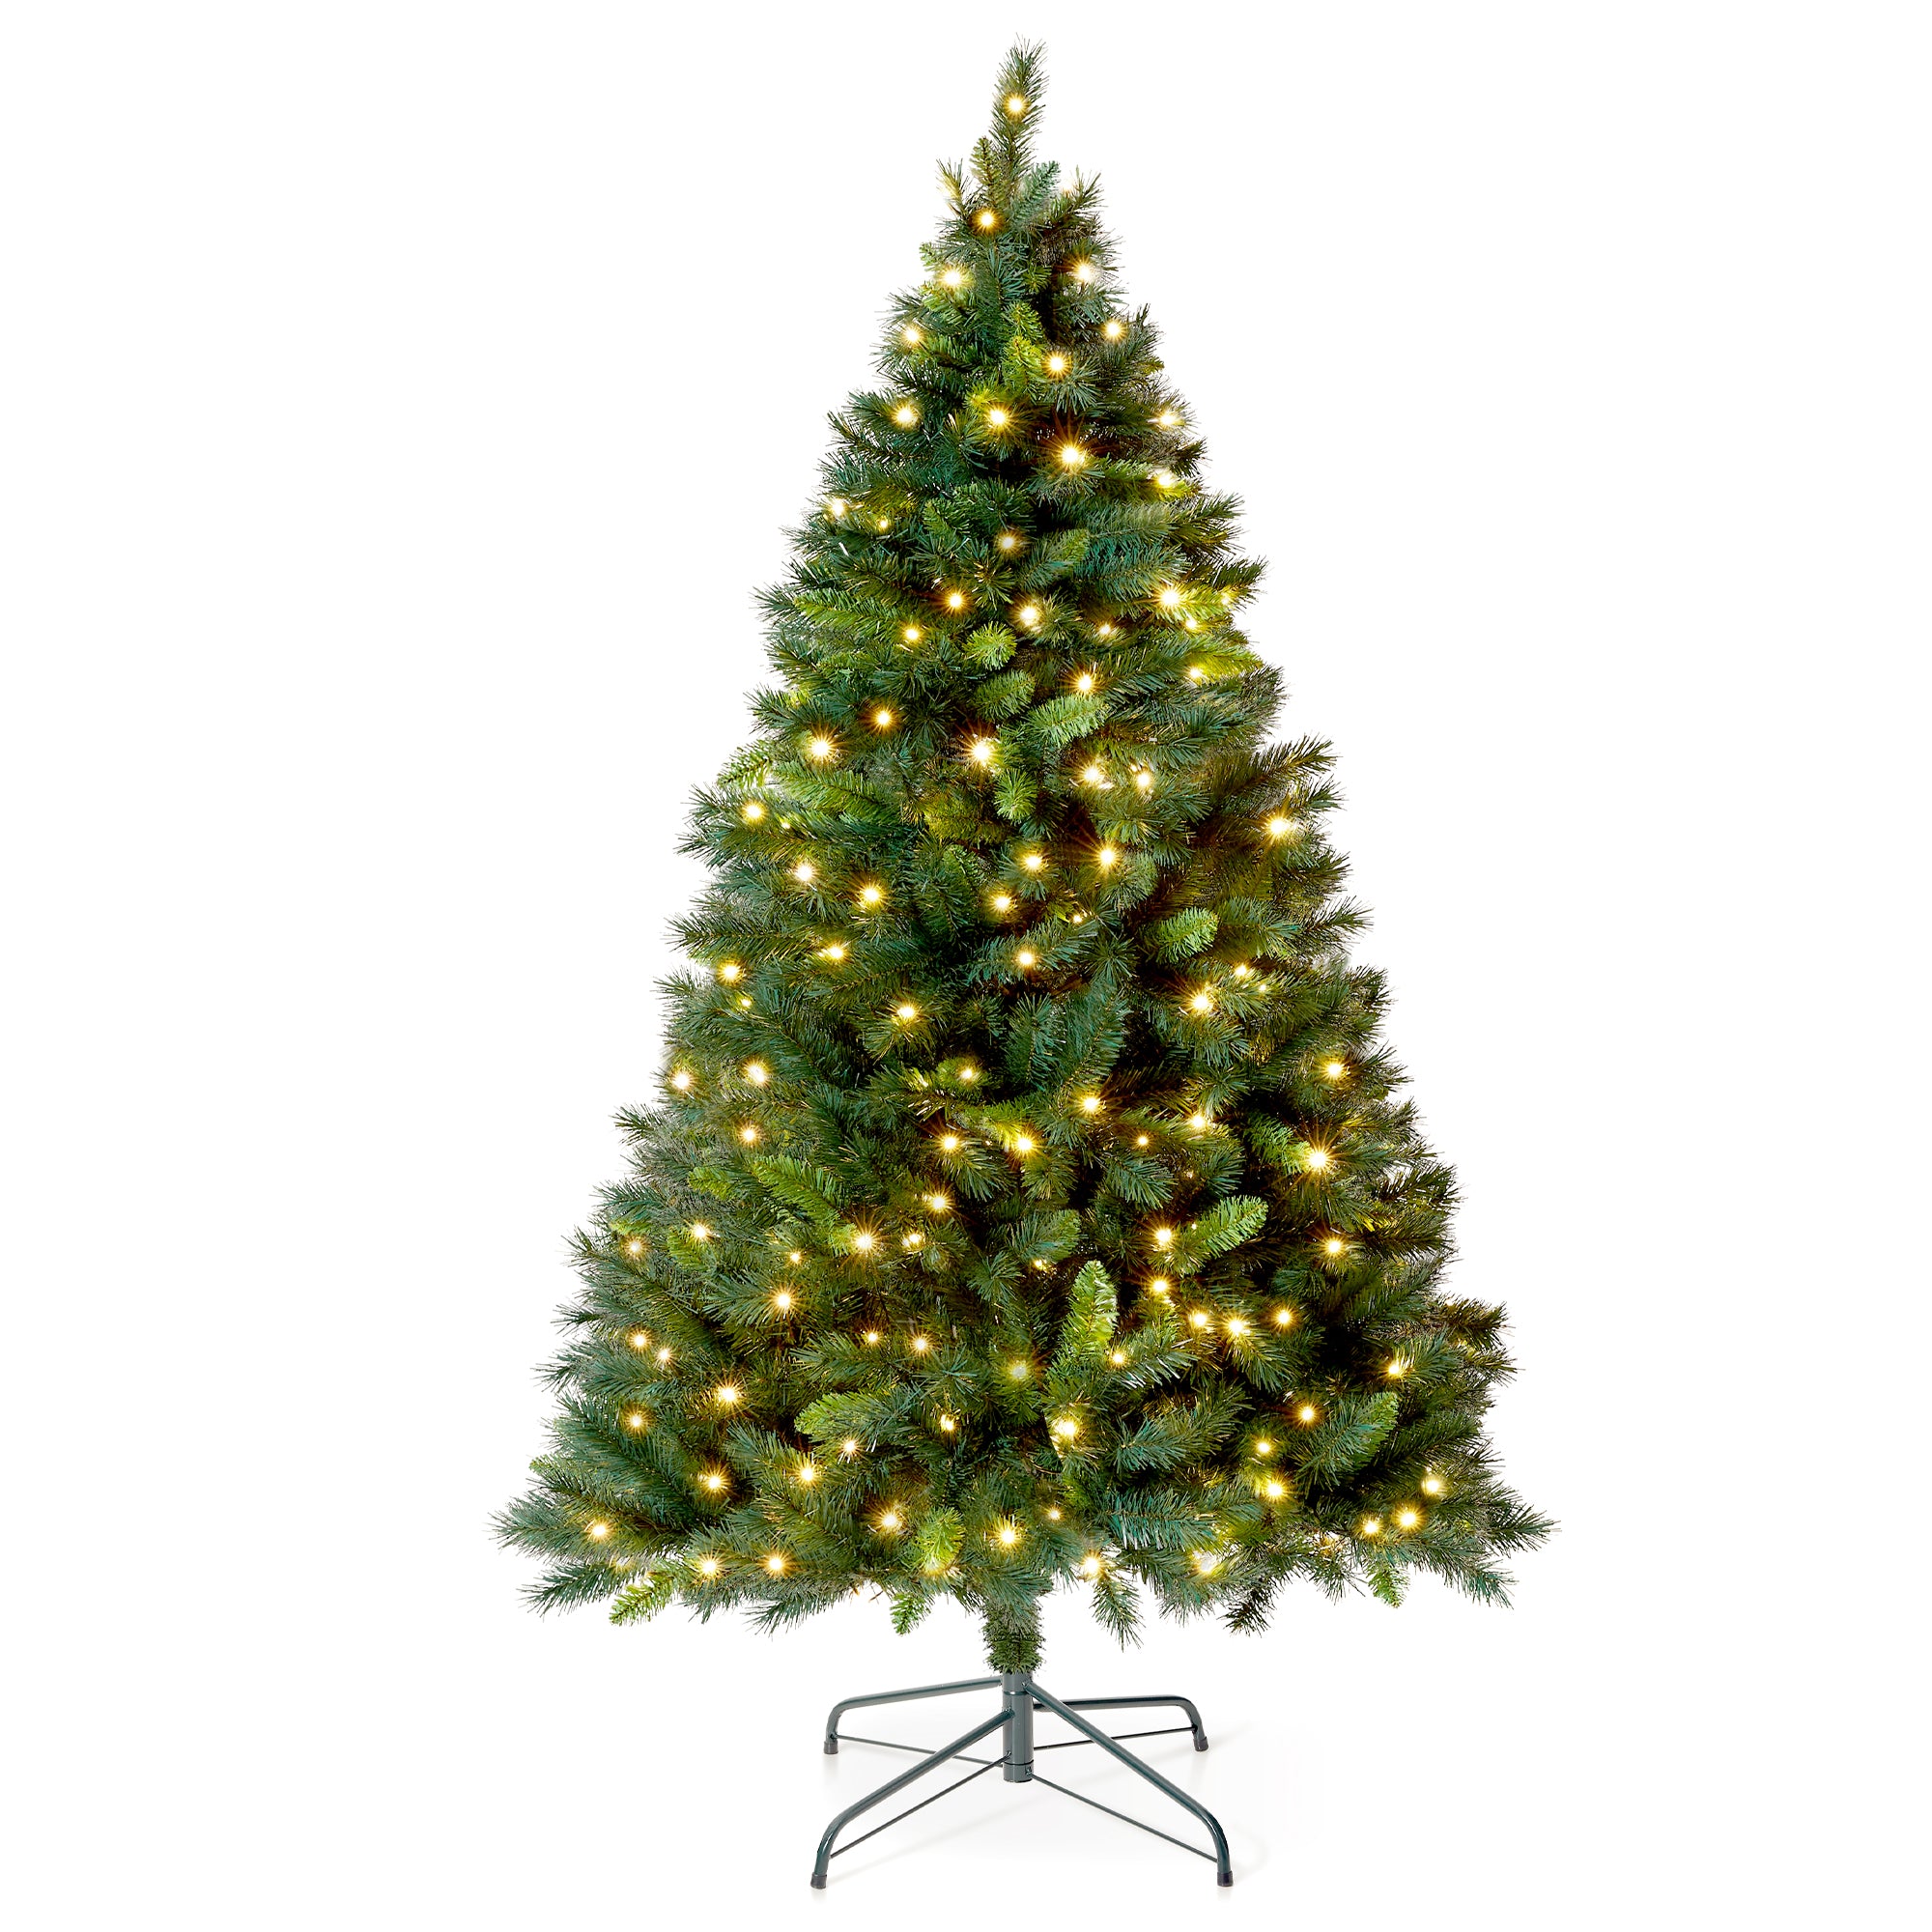 VeryMerry 7FT 'Snowhill' Pre Lit Christmas Tree with 400 Built-In Warm White LED Lights with Auto-Off Timer, 8 Lighting Modes and Foldable Metal Stand